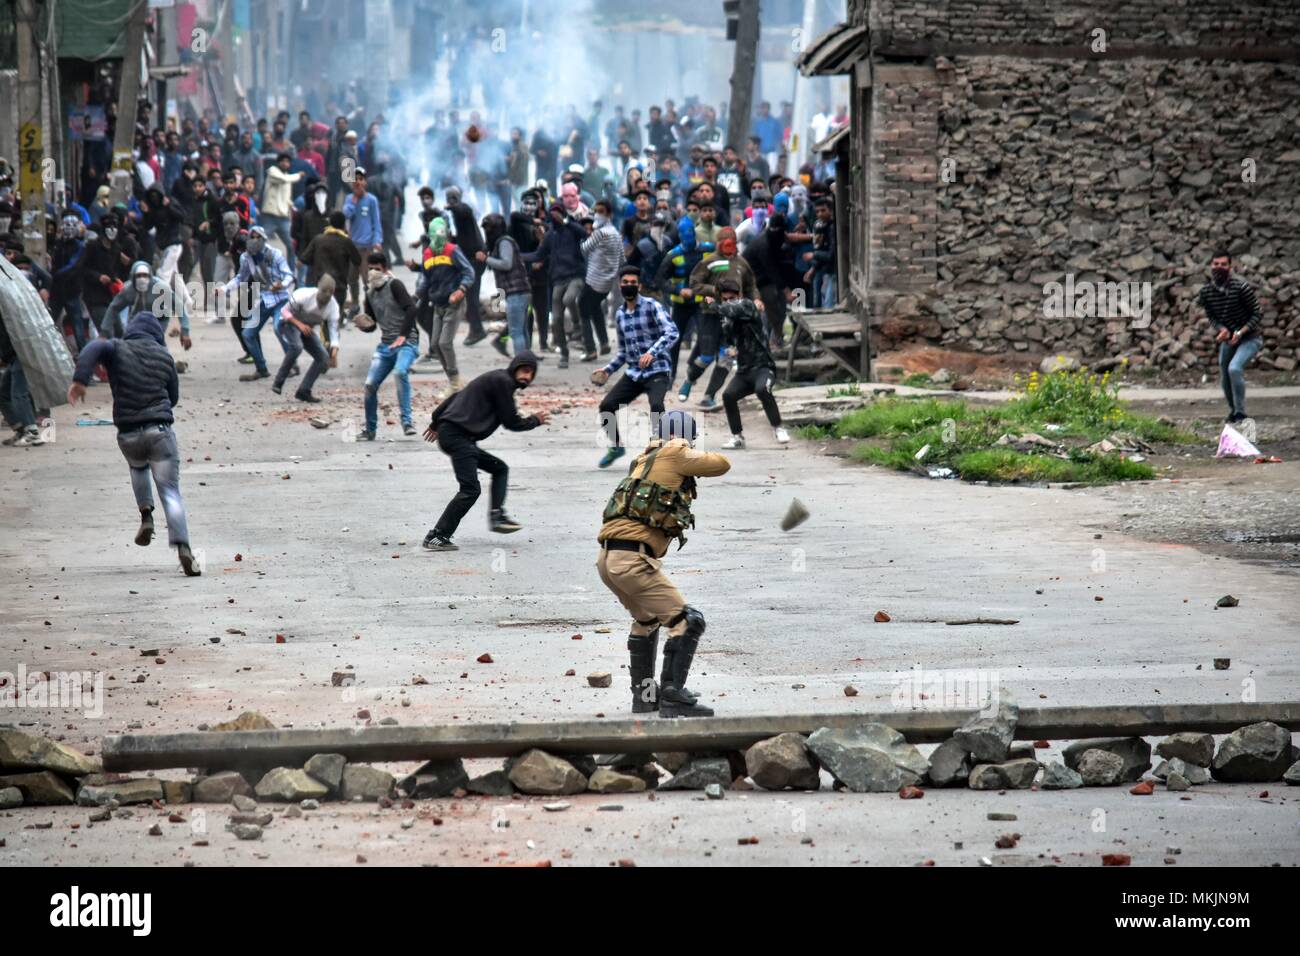 Srinagar, Kashmir. 8th May 2018. Kashmiri protesters clash with government forces in Srinagar, Kashmir. Fierce clashes broke out between government forces and Kashmiri protesters in Srinagar on Tuesday as the valley continued to remain tense over the killing of 11 people including 5 militants and 6 civilians in Kashmir. Police used tear smoke shells and shot gun pellets to disperse hundreds of demonstrators who hurled rocks and chanted anti-and pro-freedom slogans. Credit: SOPA Images Limited/Alamy Live News Stock Photo